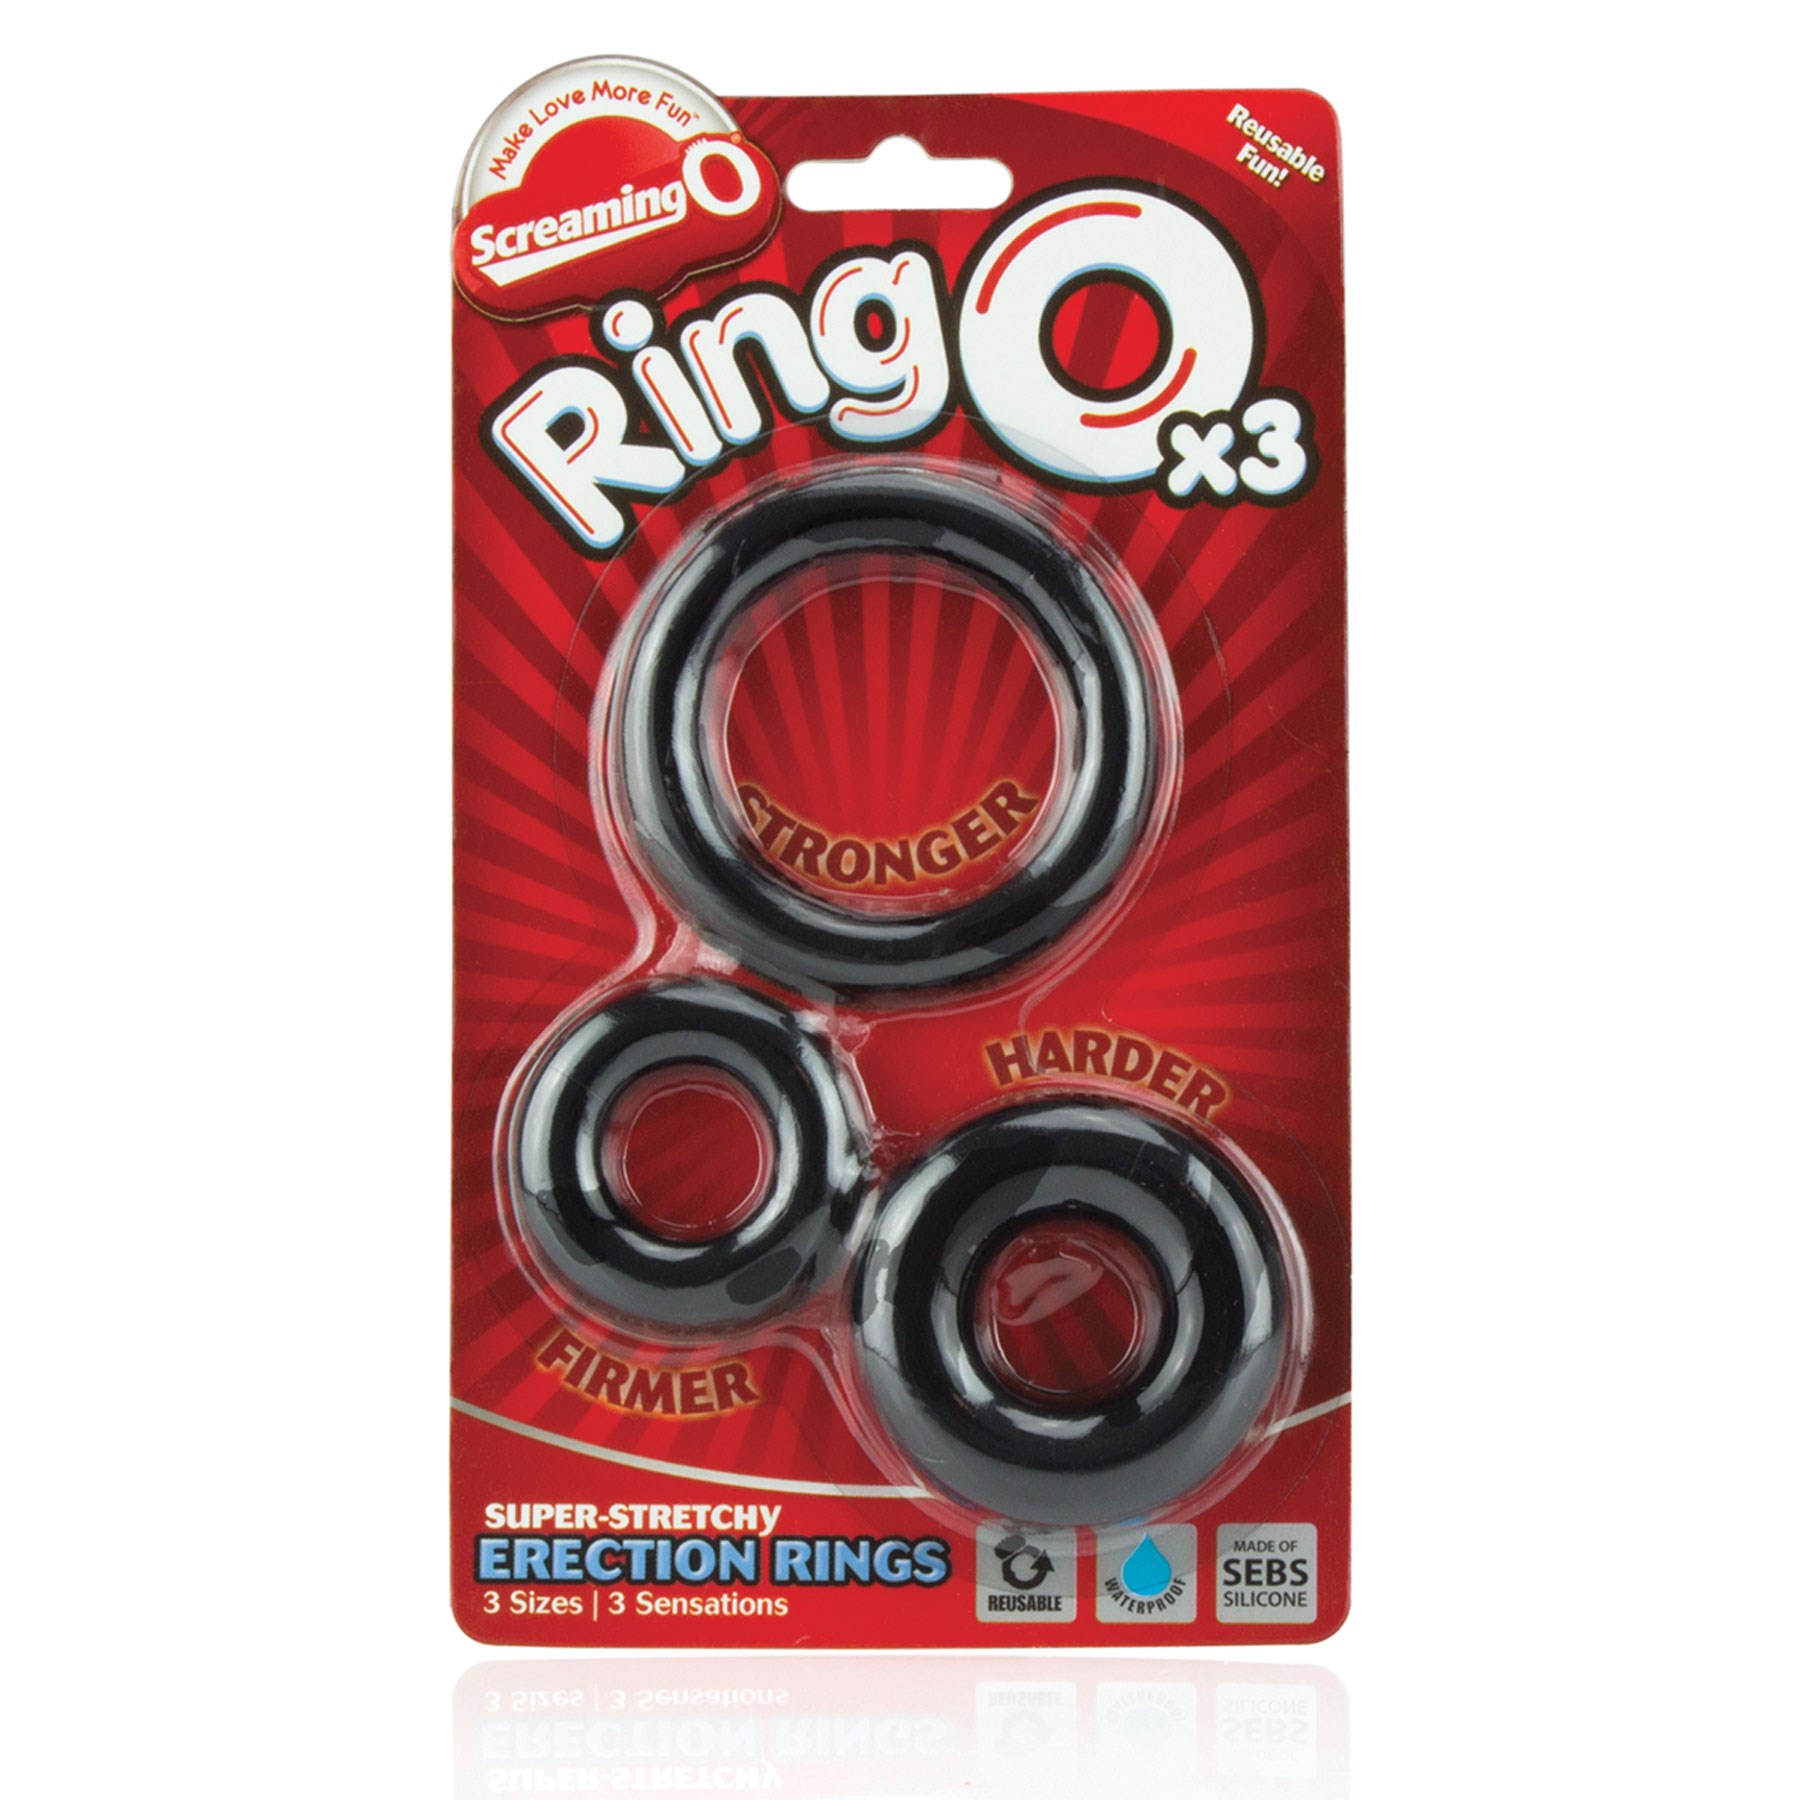 RingO Erection Rings package